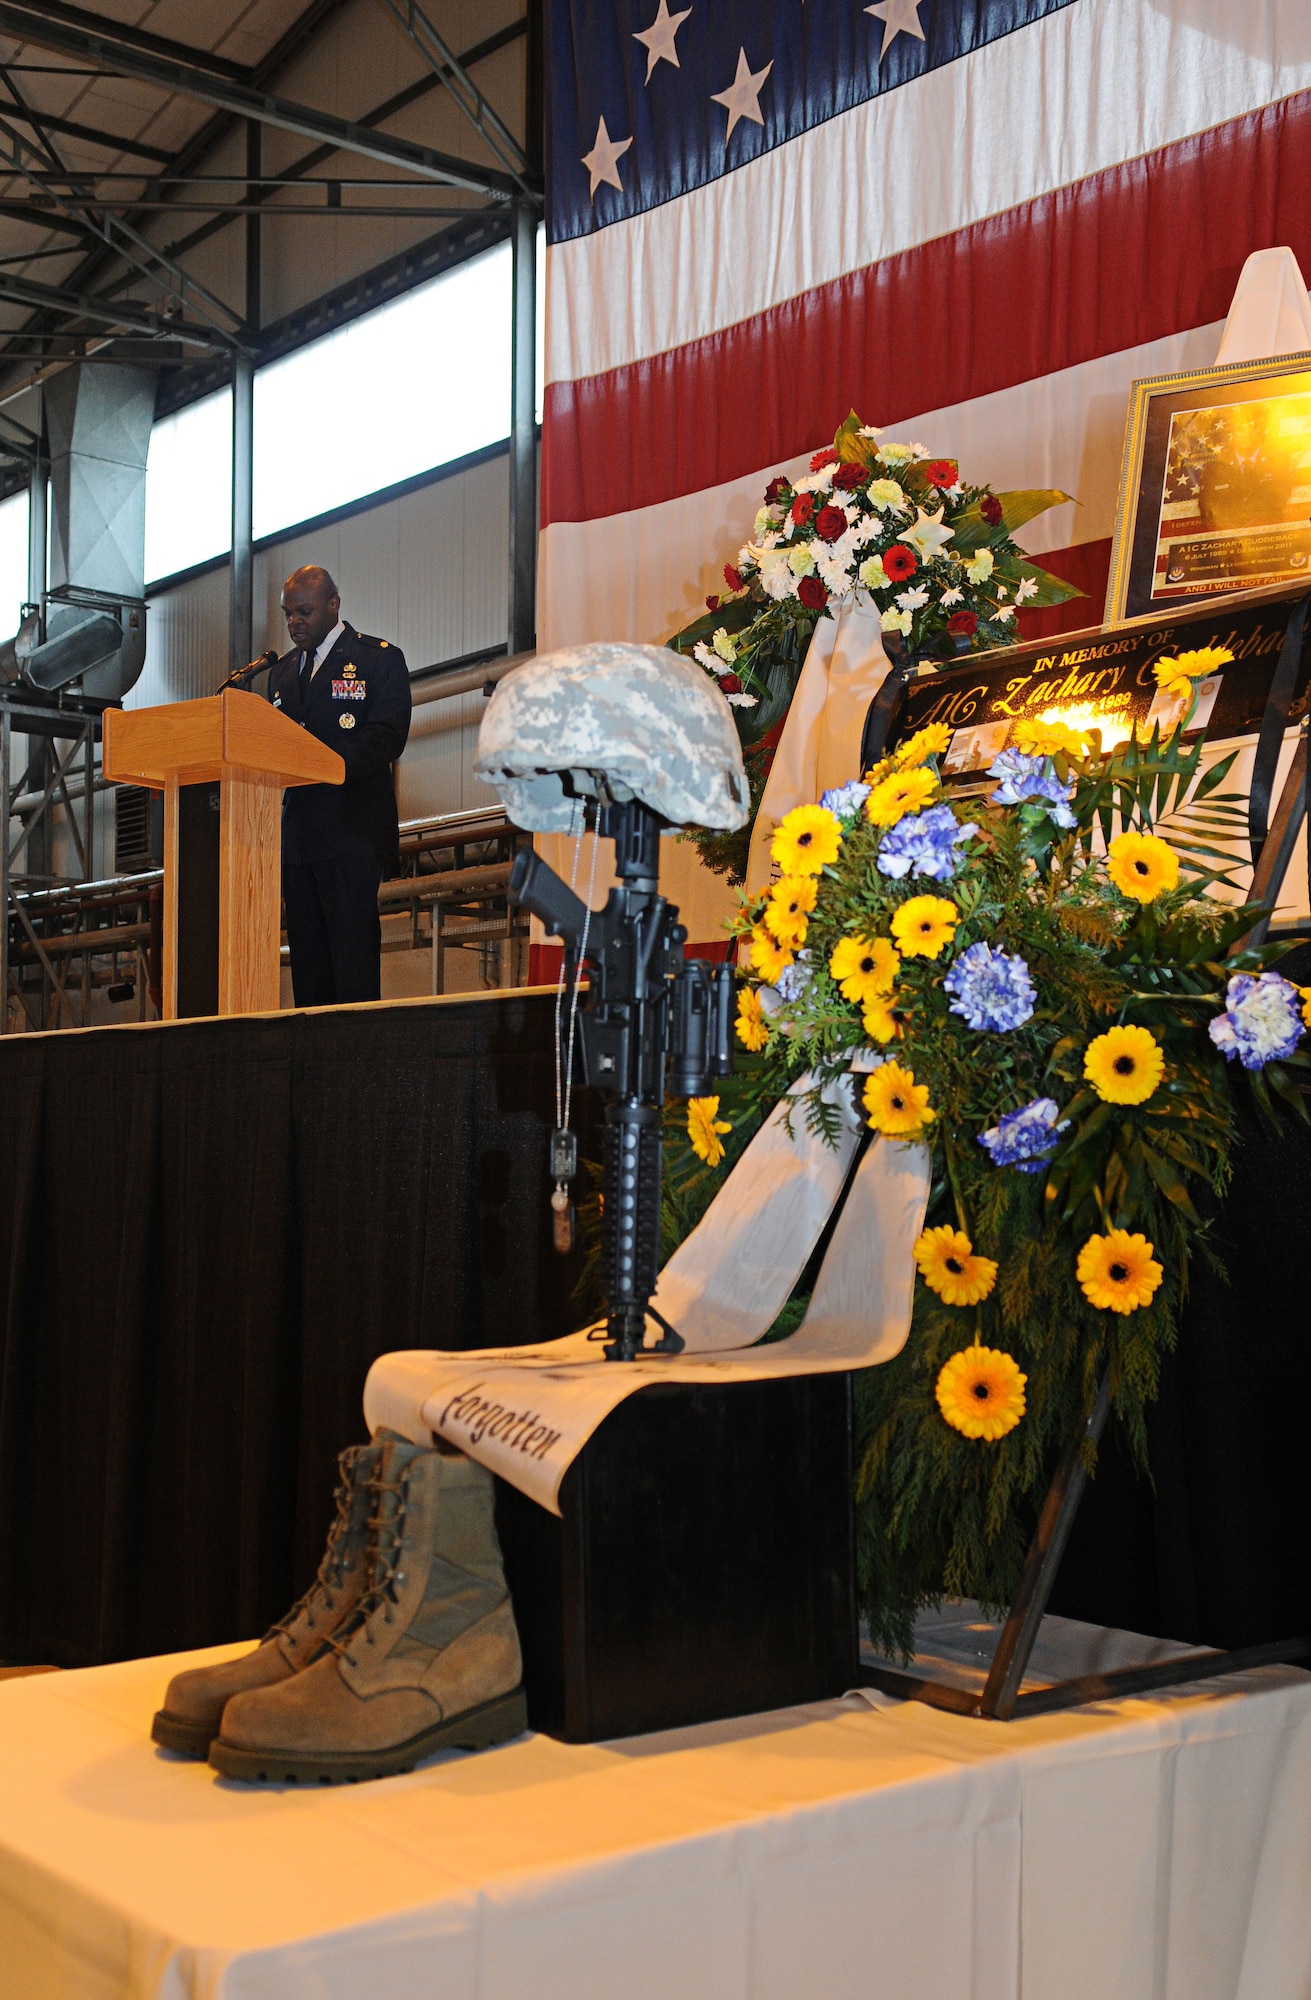 U.S. Air Force Lt. Col. Uduak Udoaka, 86th Vehicle Readiness Squadron commander, delivers his message during the memorial service for Airman 1st Class Zachary Cuddeback, 86th Vehicle Readiness Squadron, Ramstein Air Base, Germany, March 10, 2011. Airman Cuddeback was killed in action at Frankfurt International Airport March 2, 2011. (U.S. Air Force photo by Airman 1st Class Desiree Whitney Esposito) 